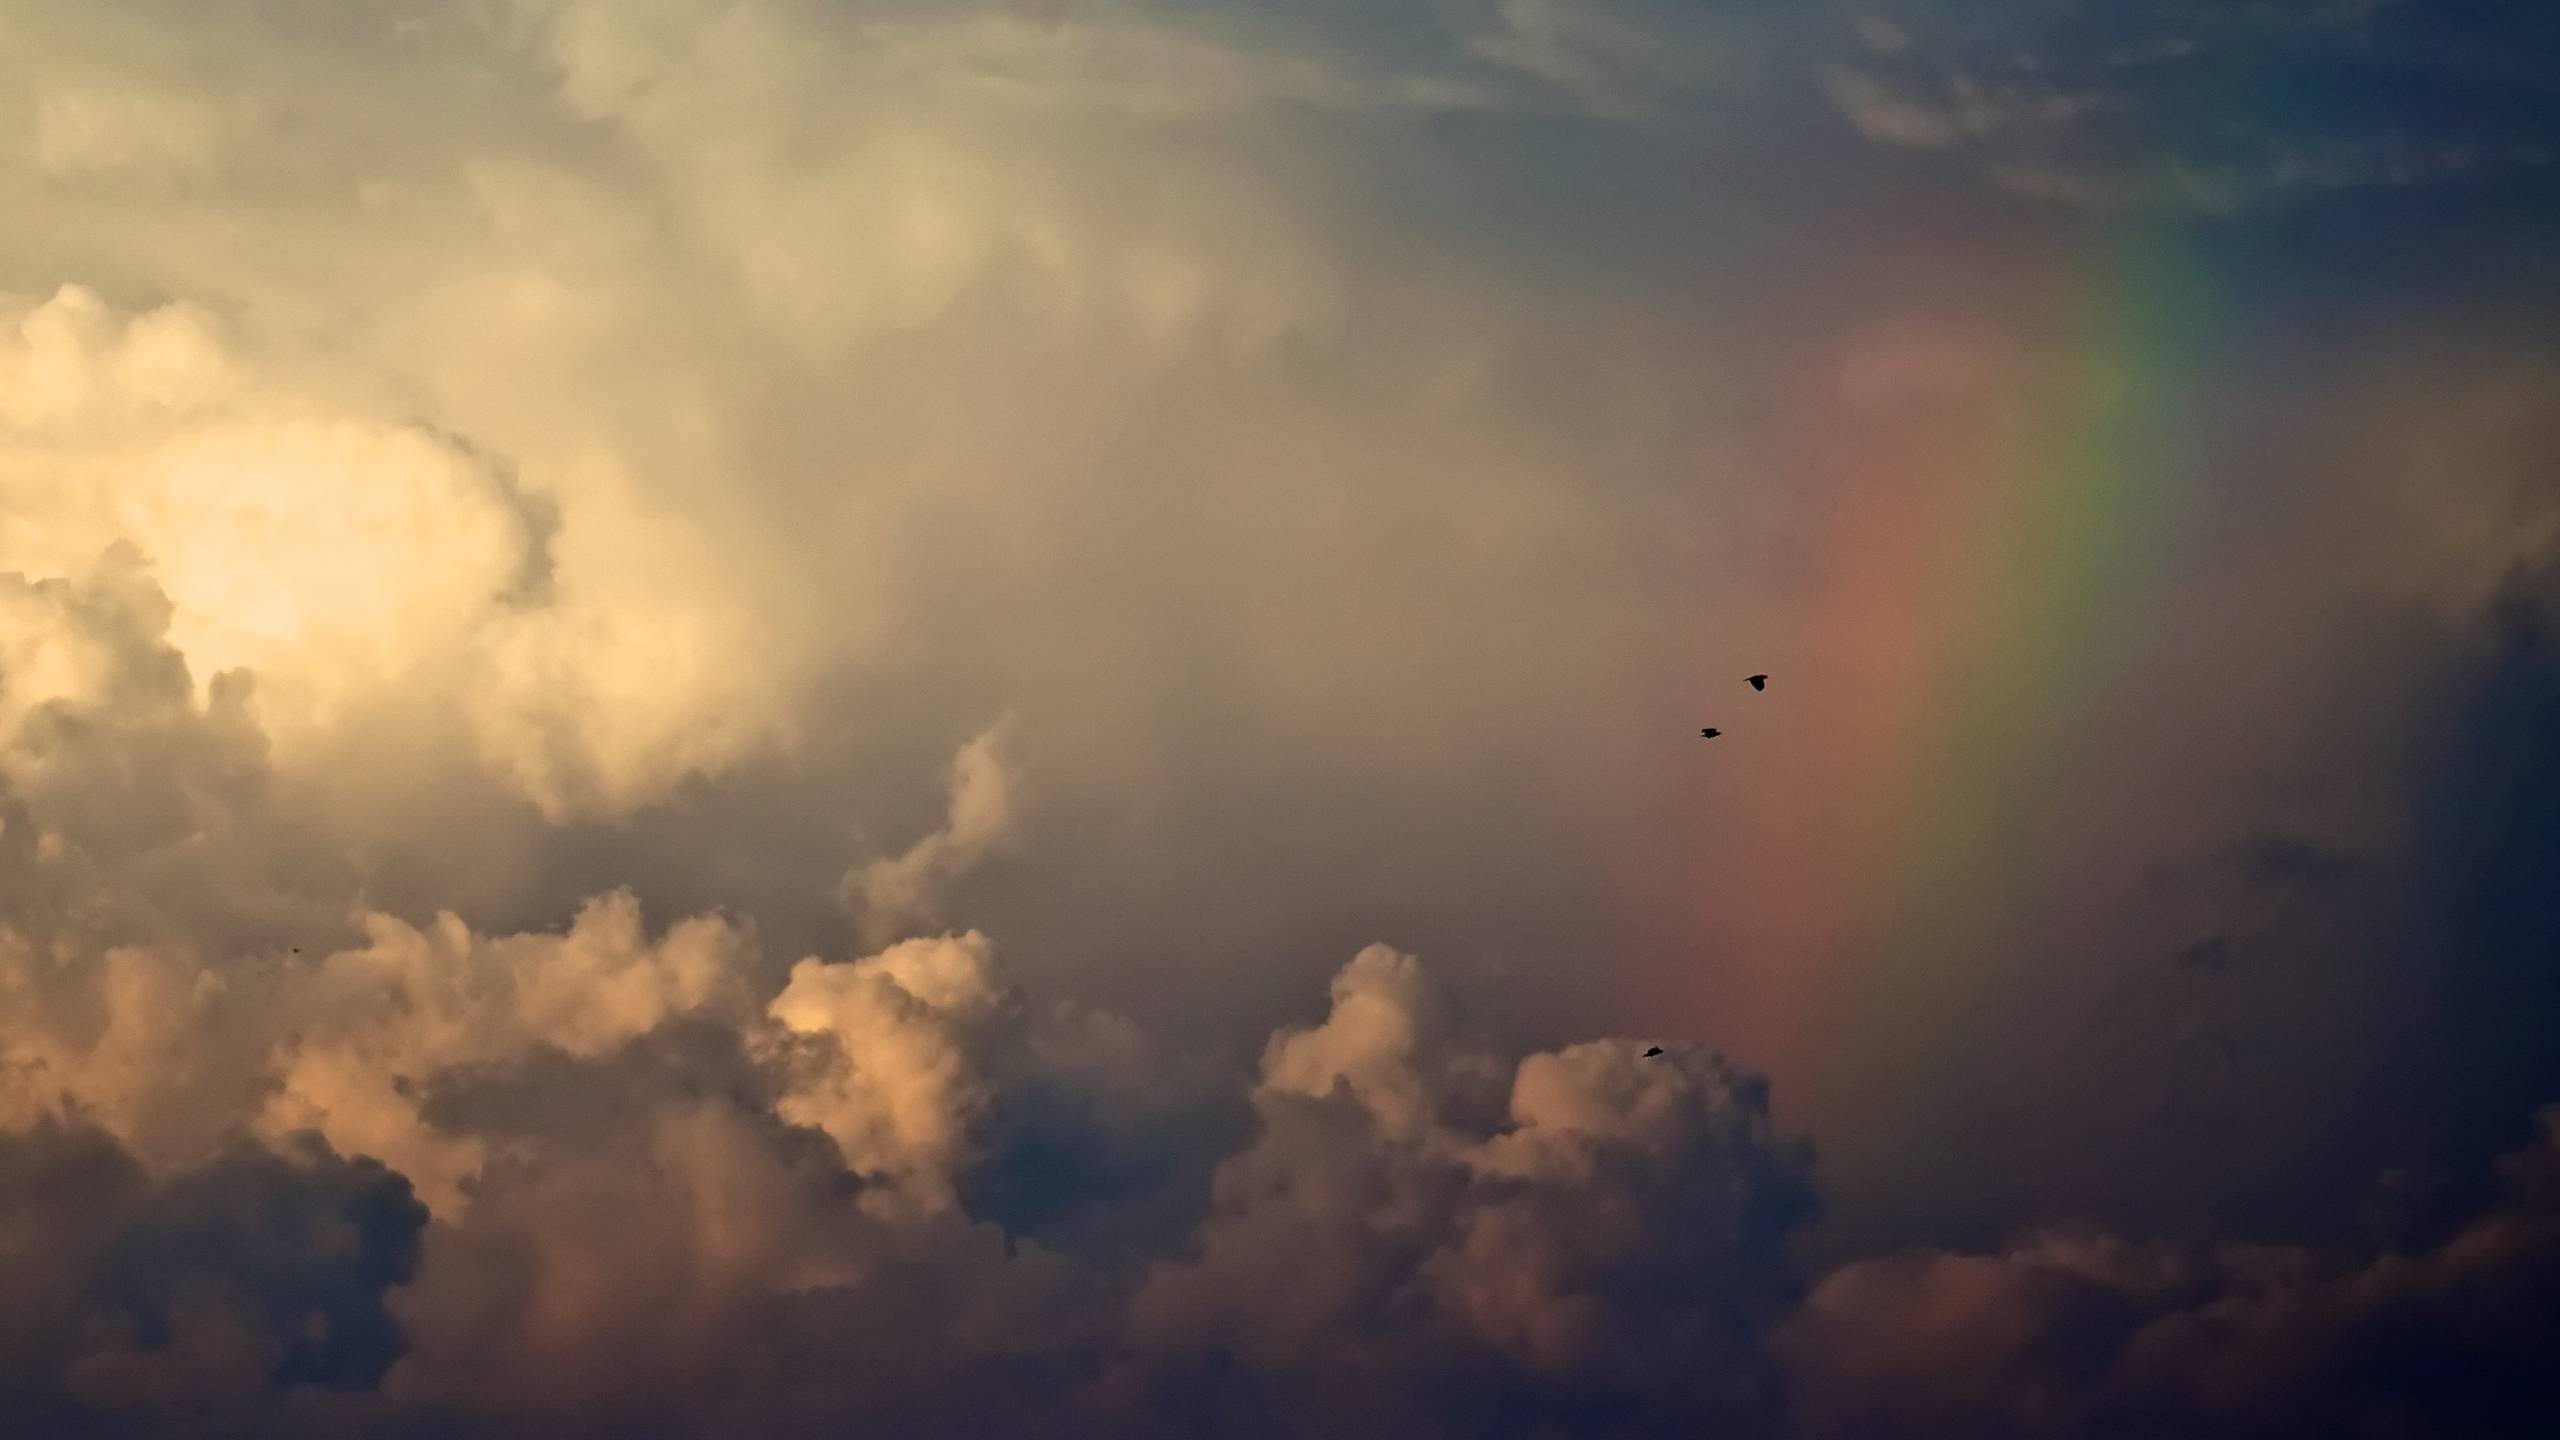 Storm Clouds And Rainbow iMac Wallpaper. HD Wallpaper Source